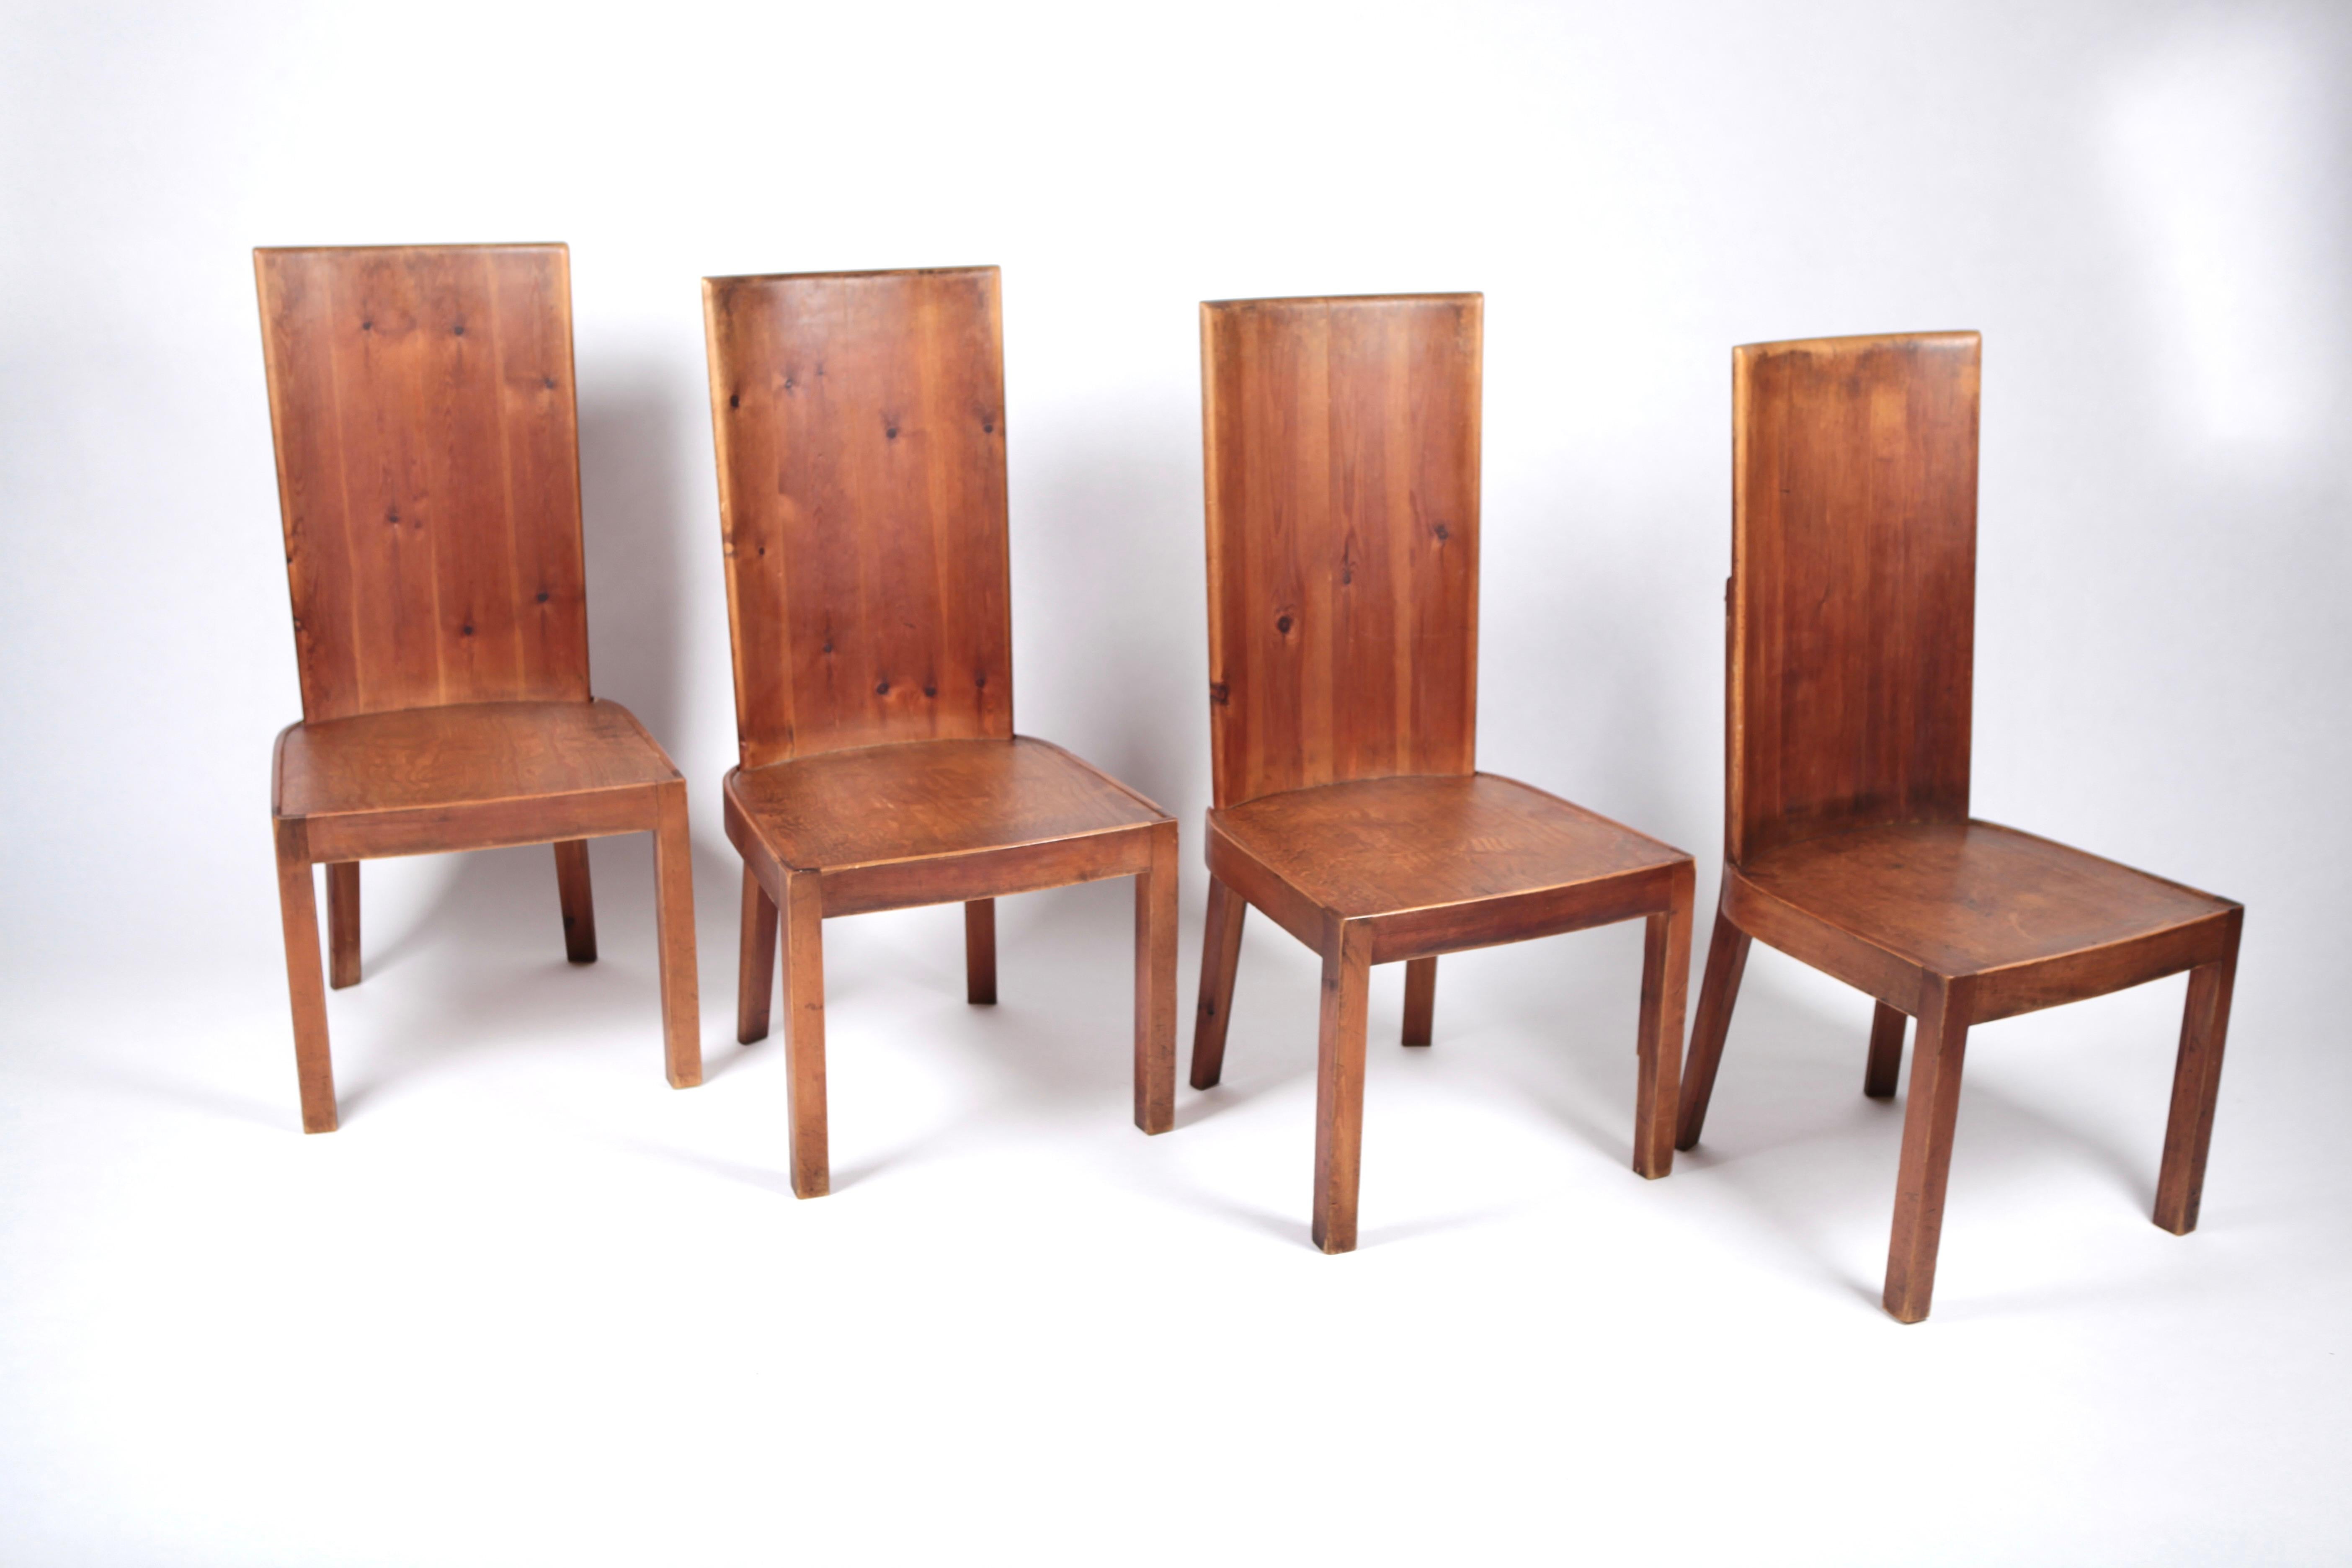 Scandinavian Modern Set of 4 High Back Stained Pine Chairs, Attributed to Axel Einar Hjorth, Sweden  For Sale